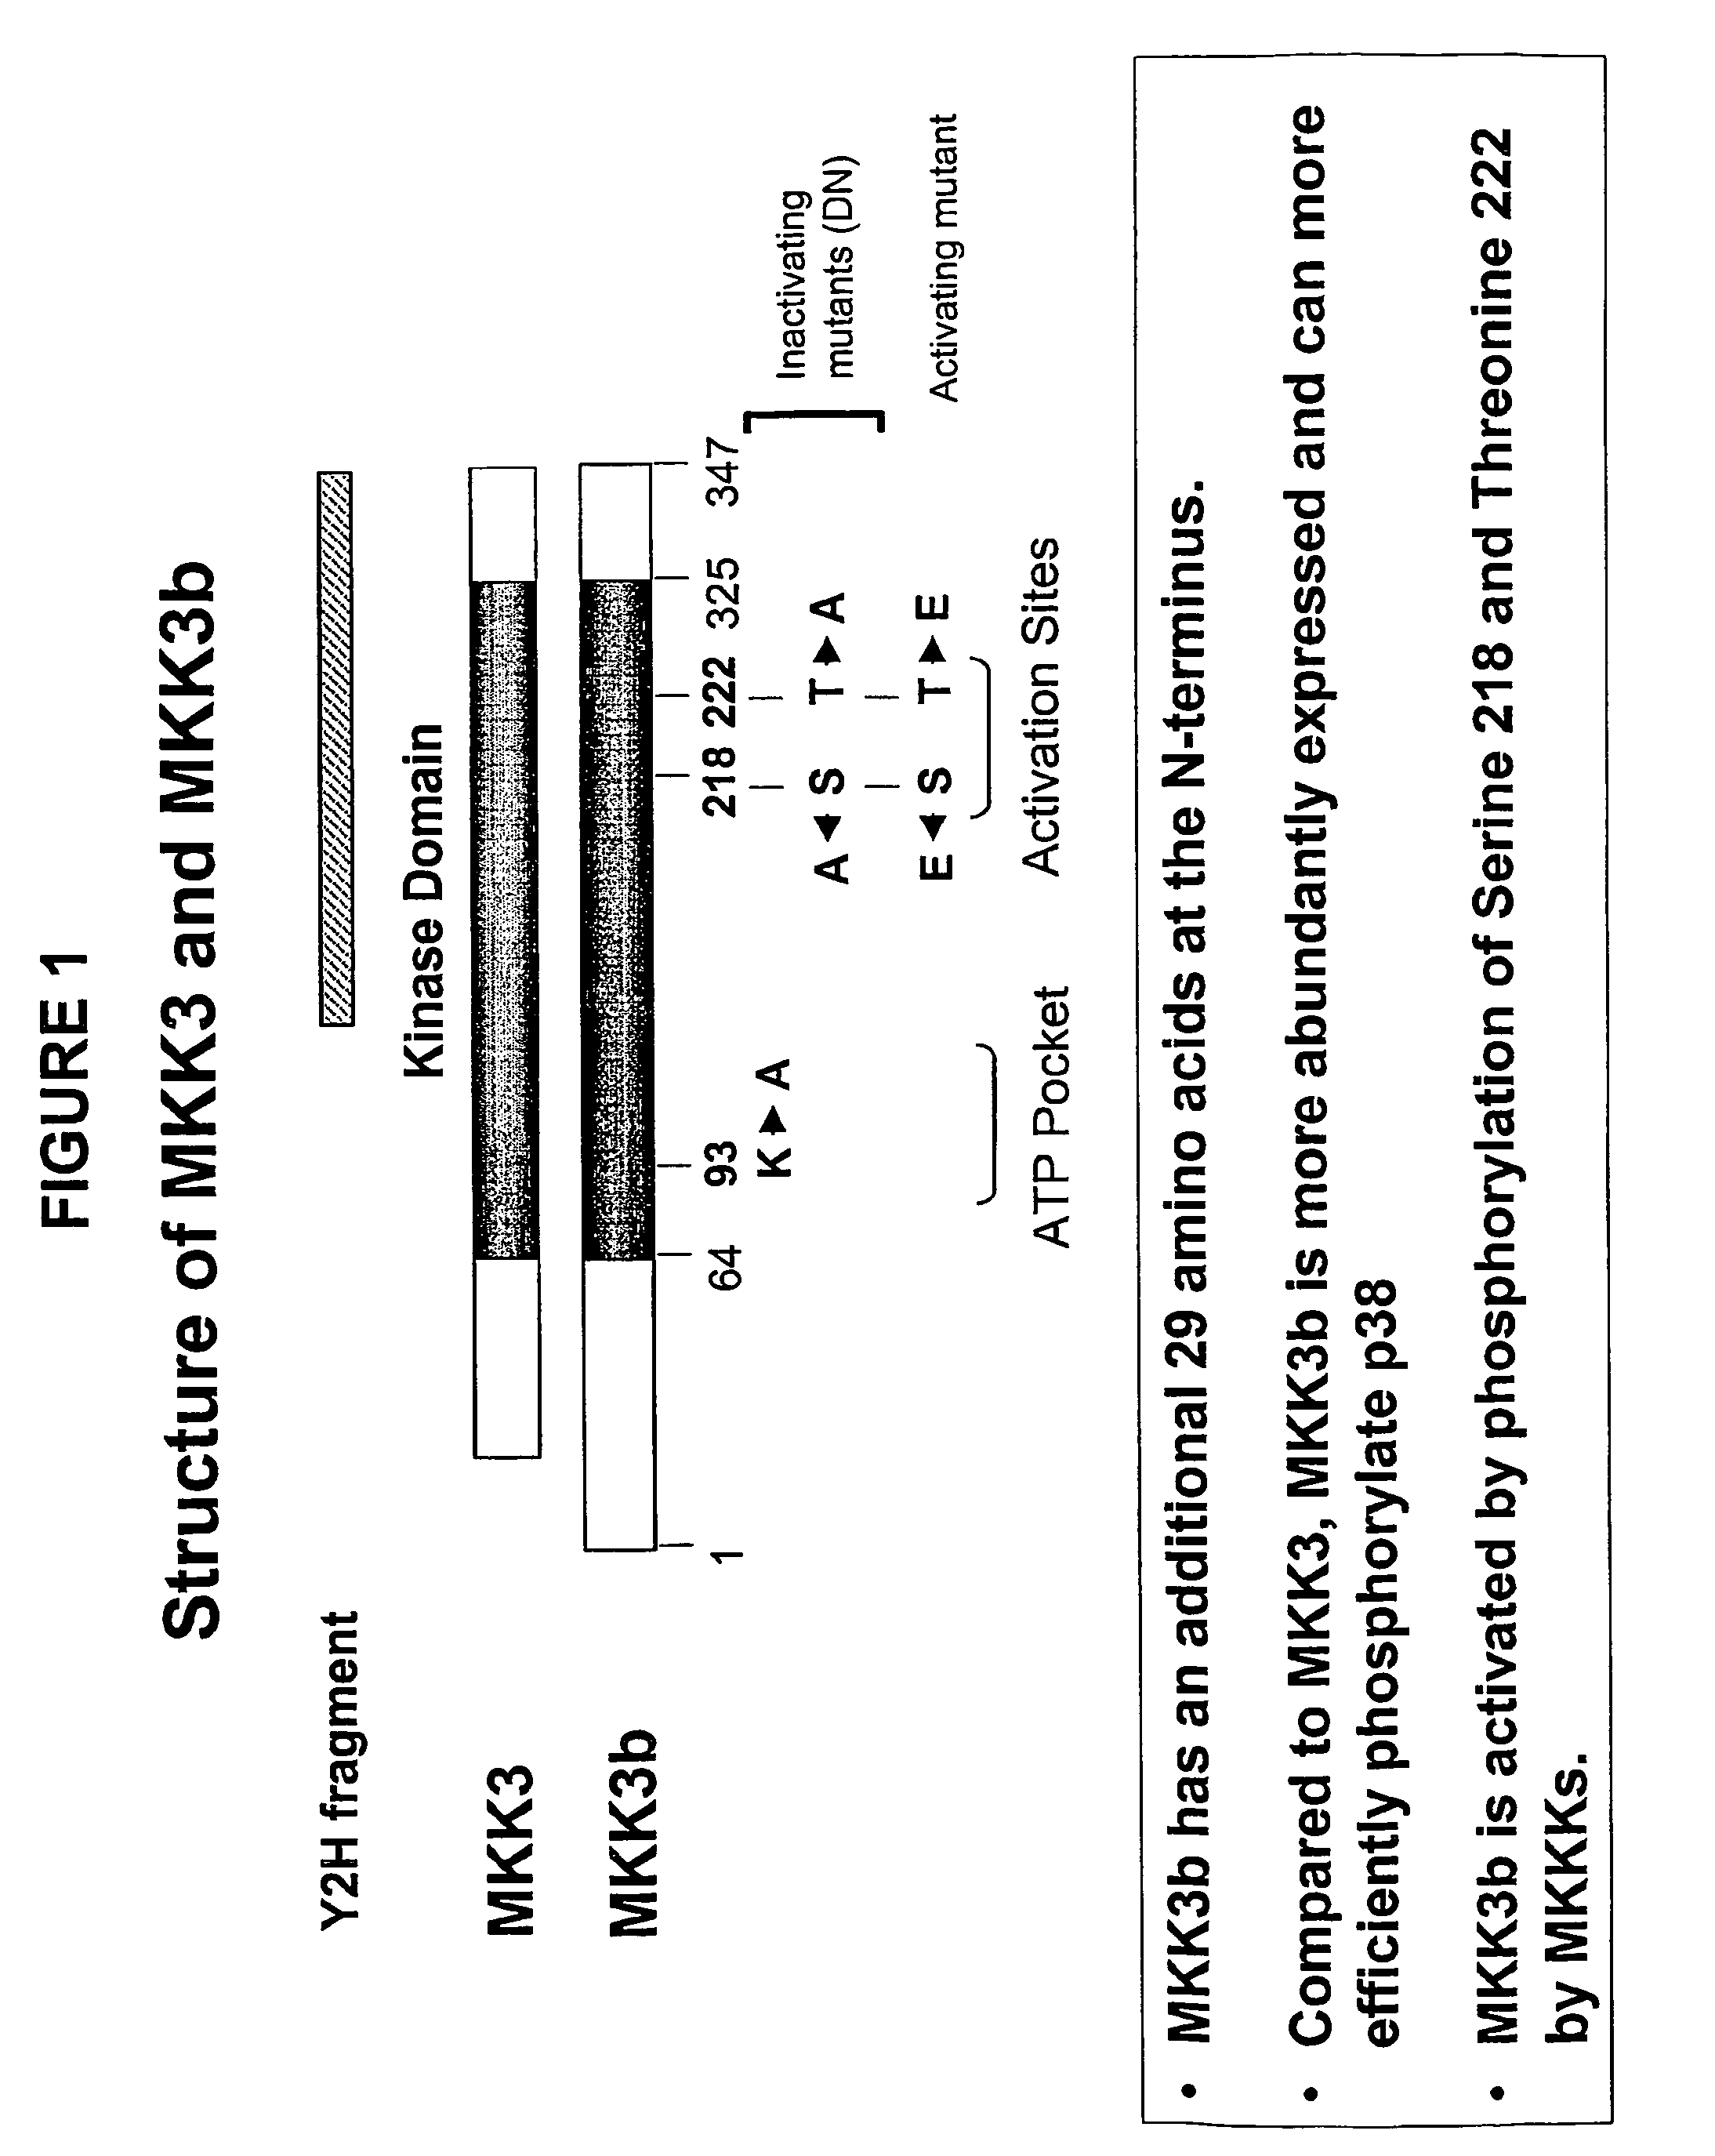 Modulators of lymphocyte activation, Mkk3b compositions and methods of use